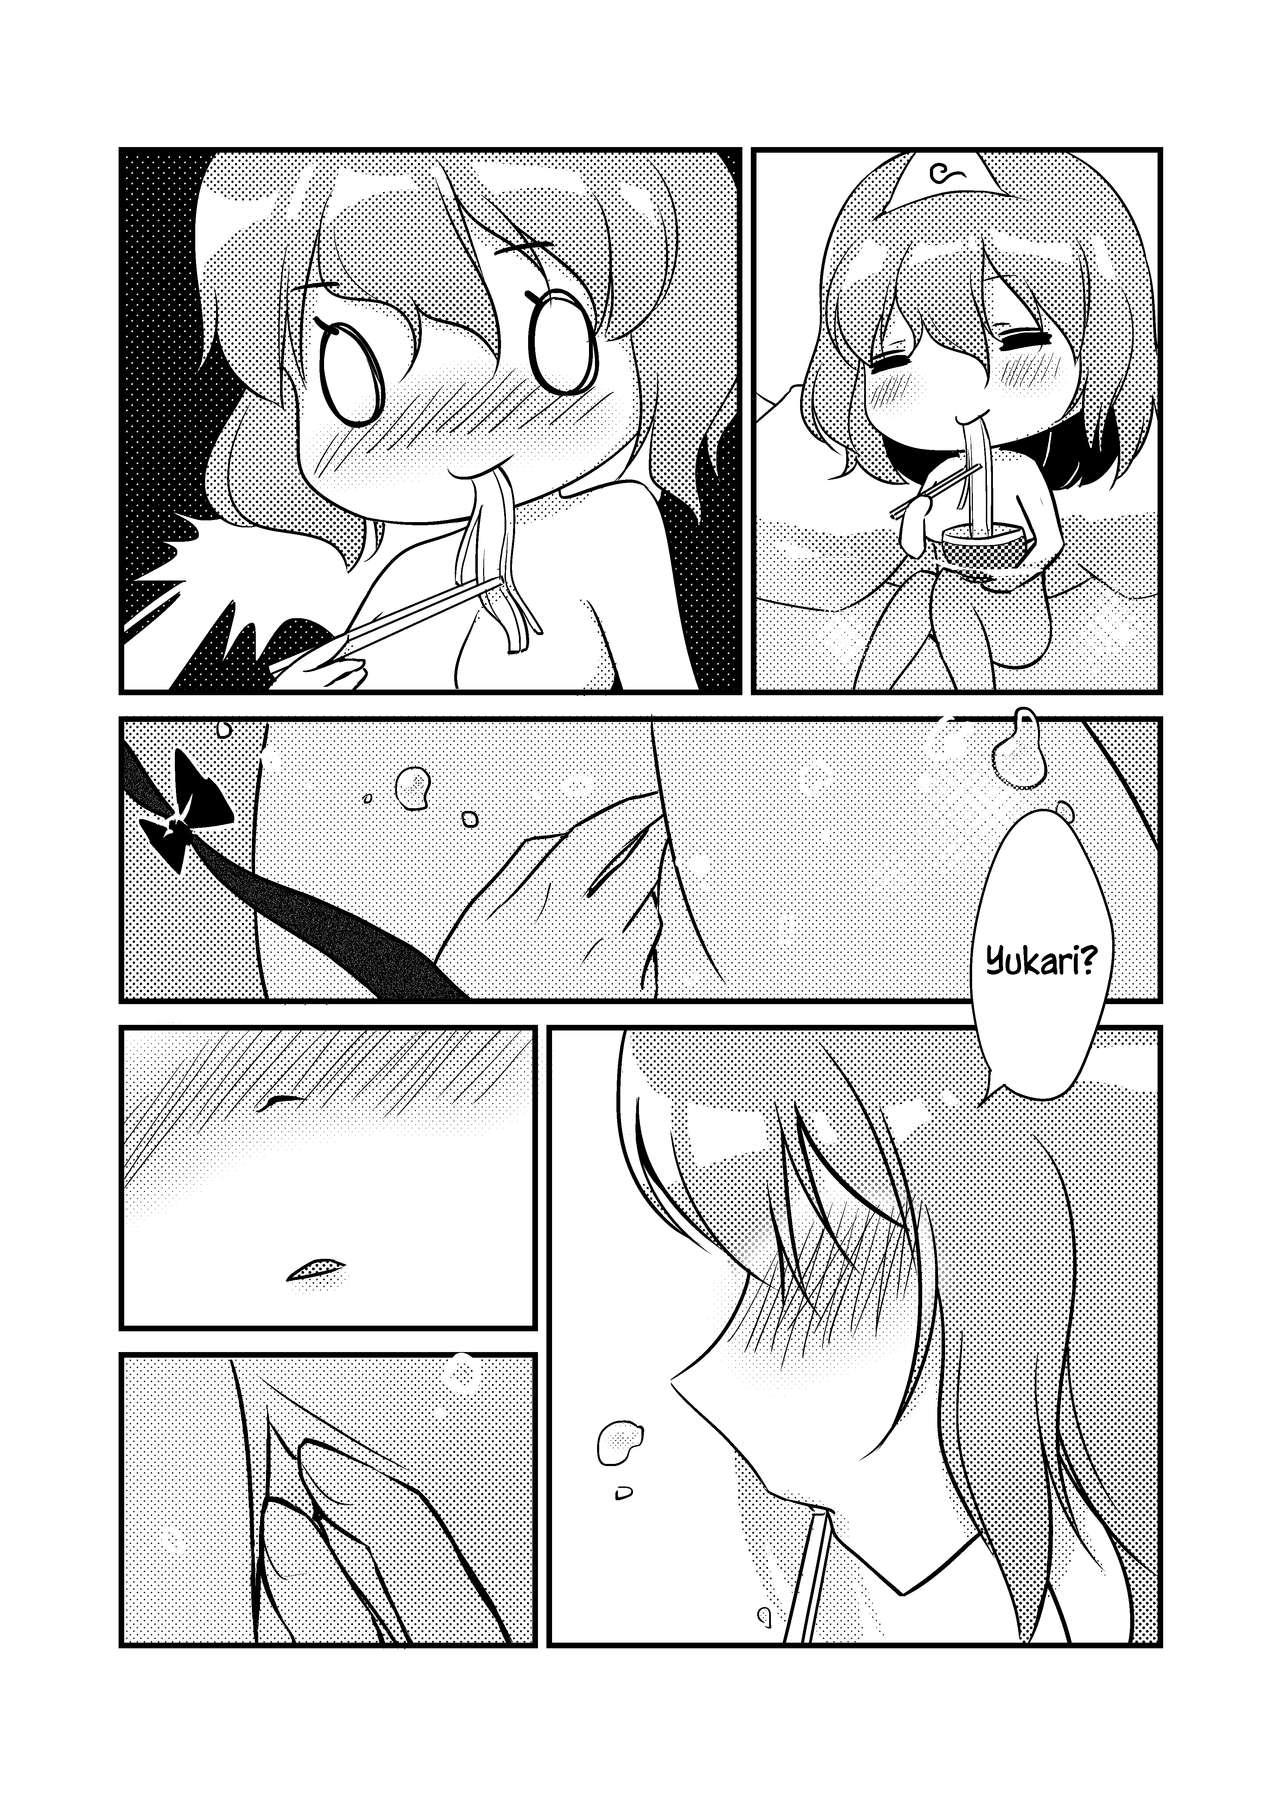 Blacks ????一起泡温泉吧！ | ????Let's Soak in the Hot Spring! - Touhou project Ruiva - Page 5